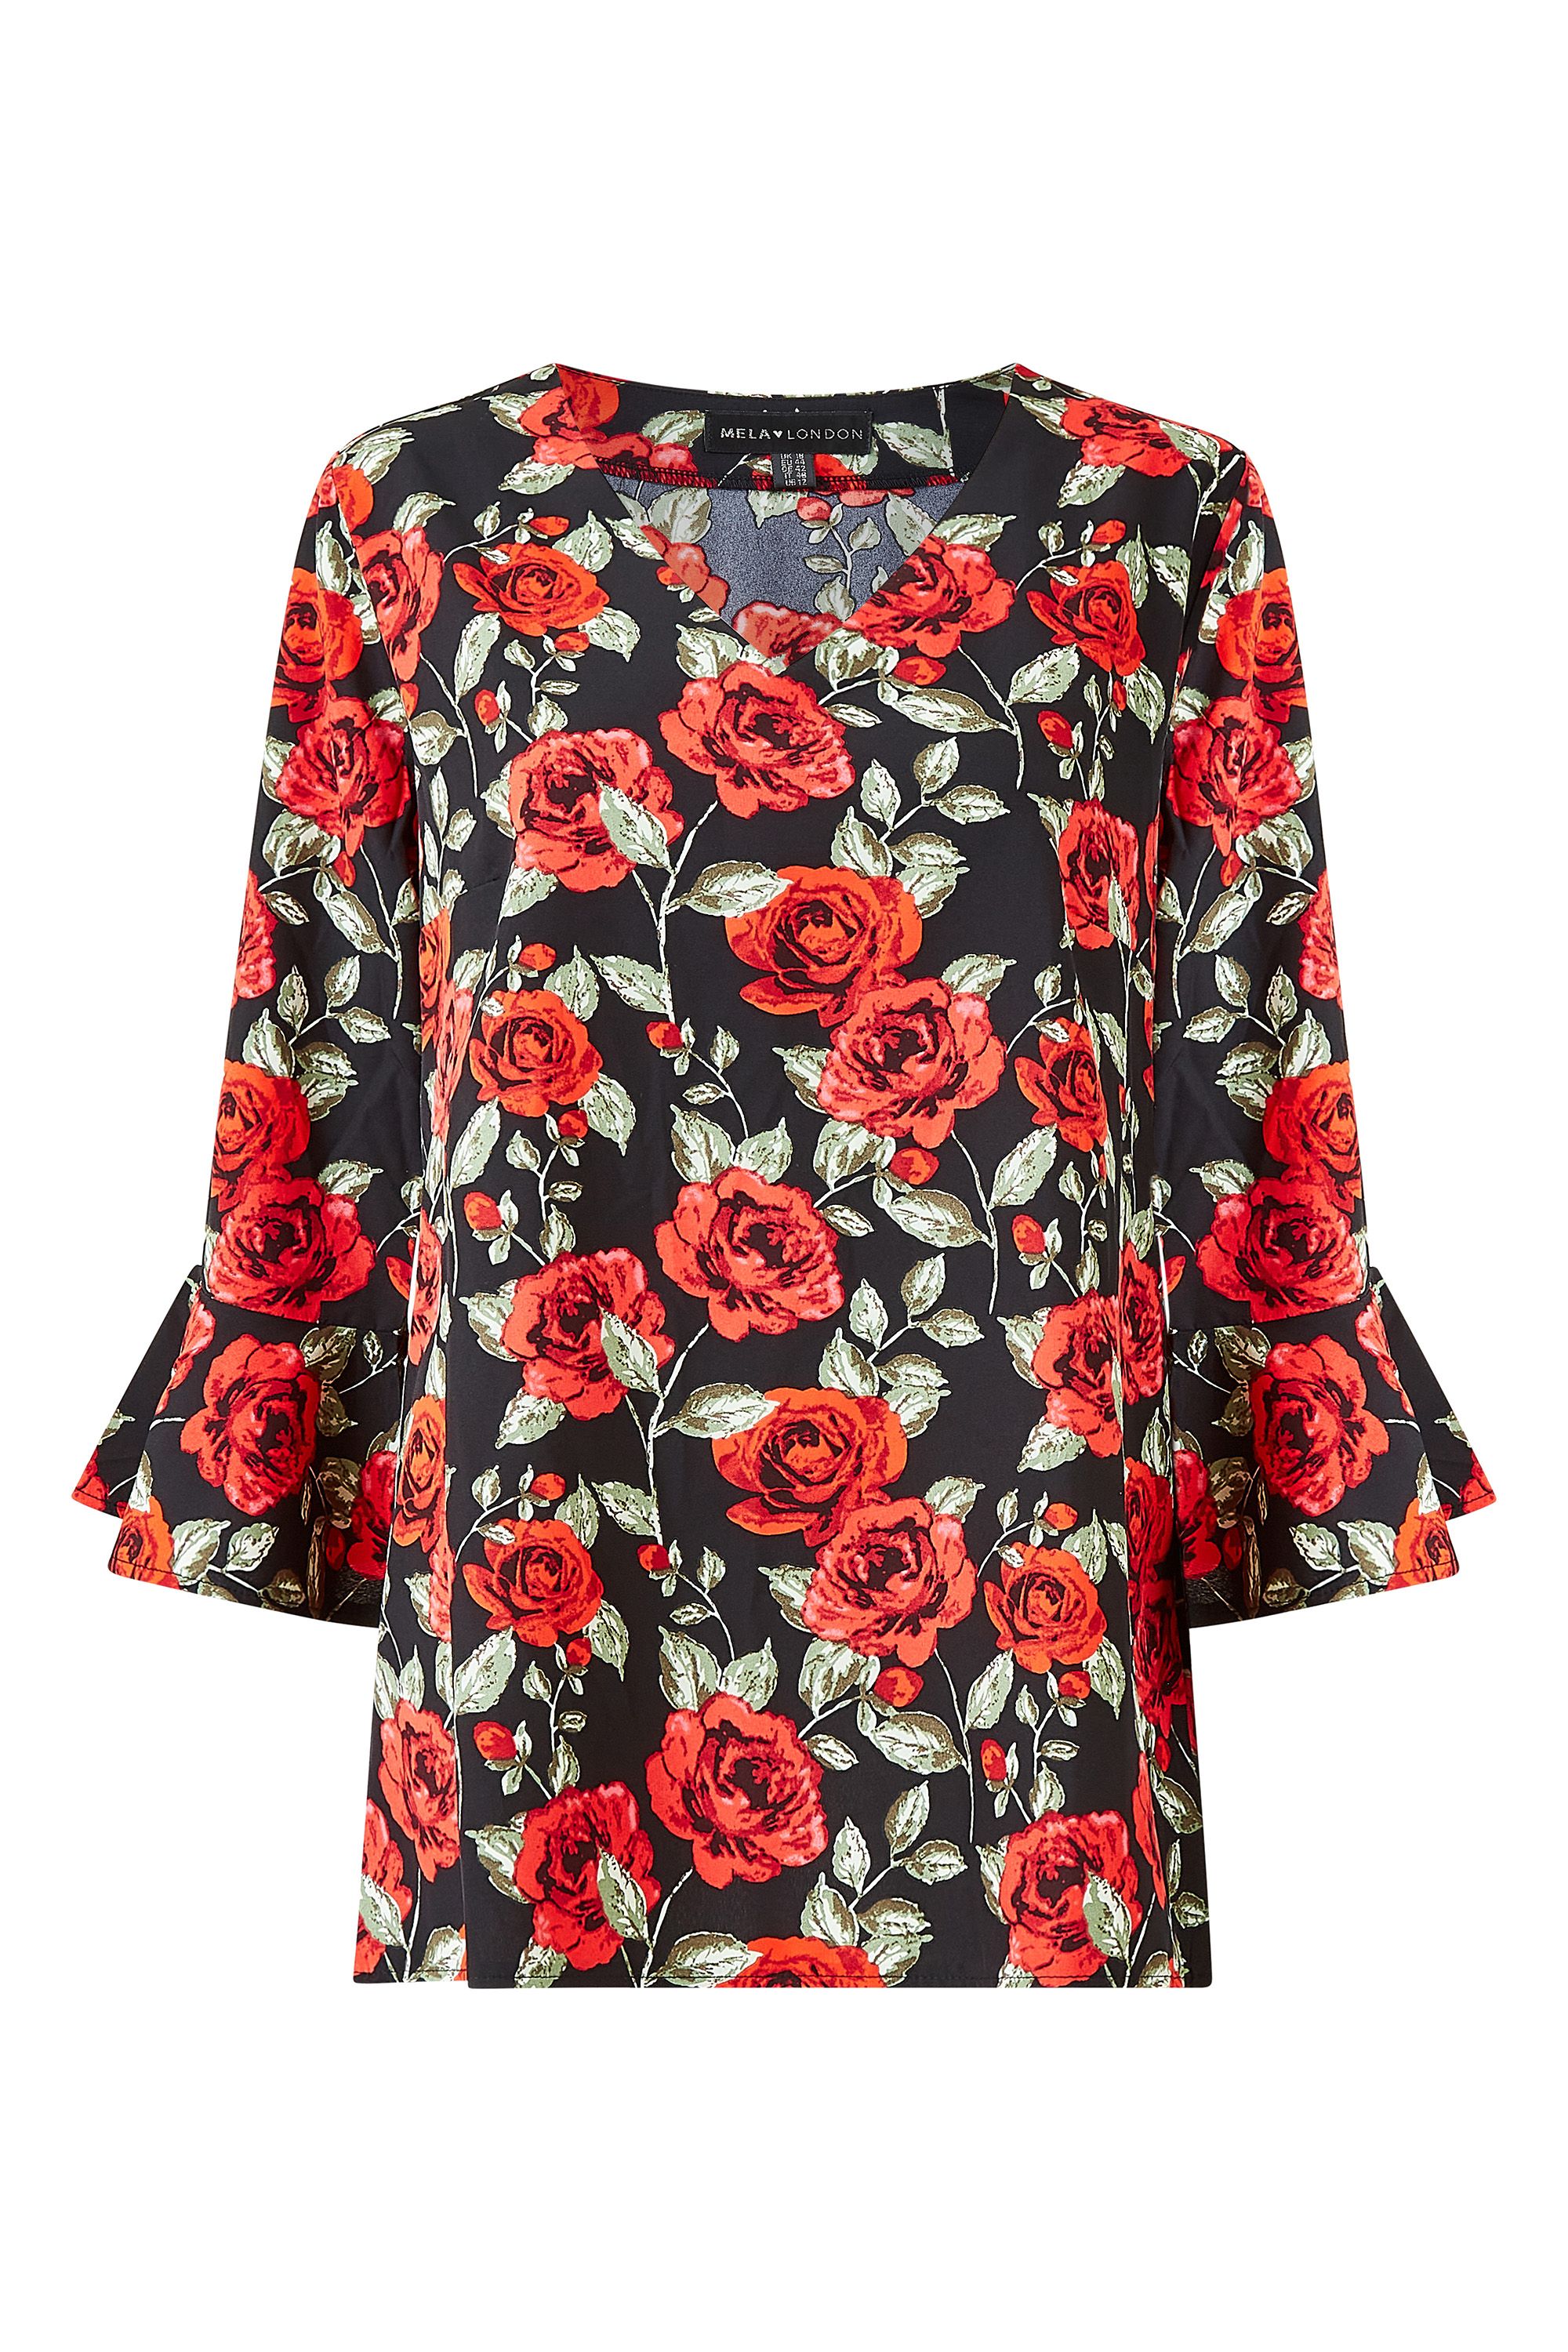 With a bold floral print, this Mela Plus Size Rose Top is designed with a classic relaxed shape. Its lightweight fabric with a floaty feel offers comfort and style, whilst the fluted sleeves and V-neckline lend chic detailing to your off-duty look. Fancy dressing it up? Pair with a faux-leather skirt and heels.